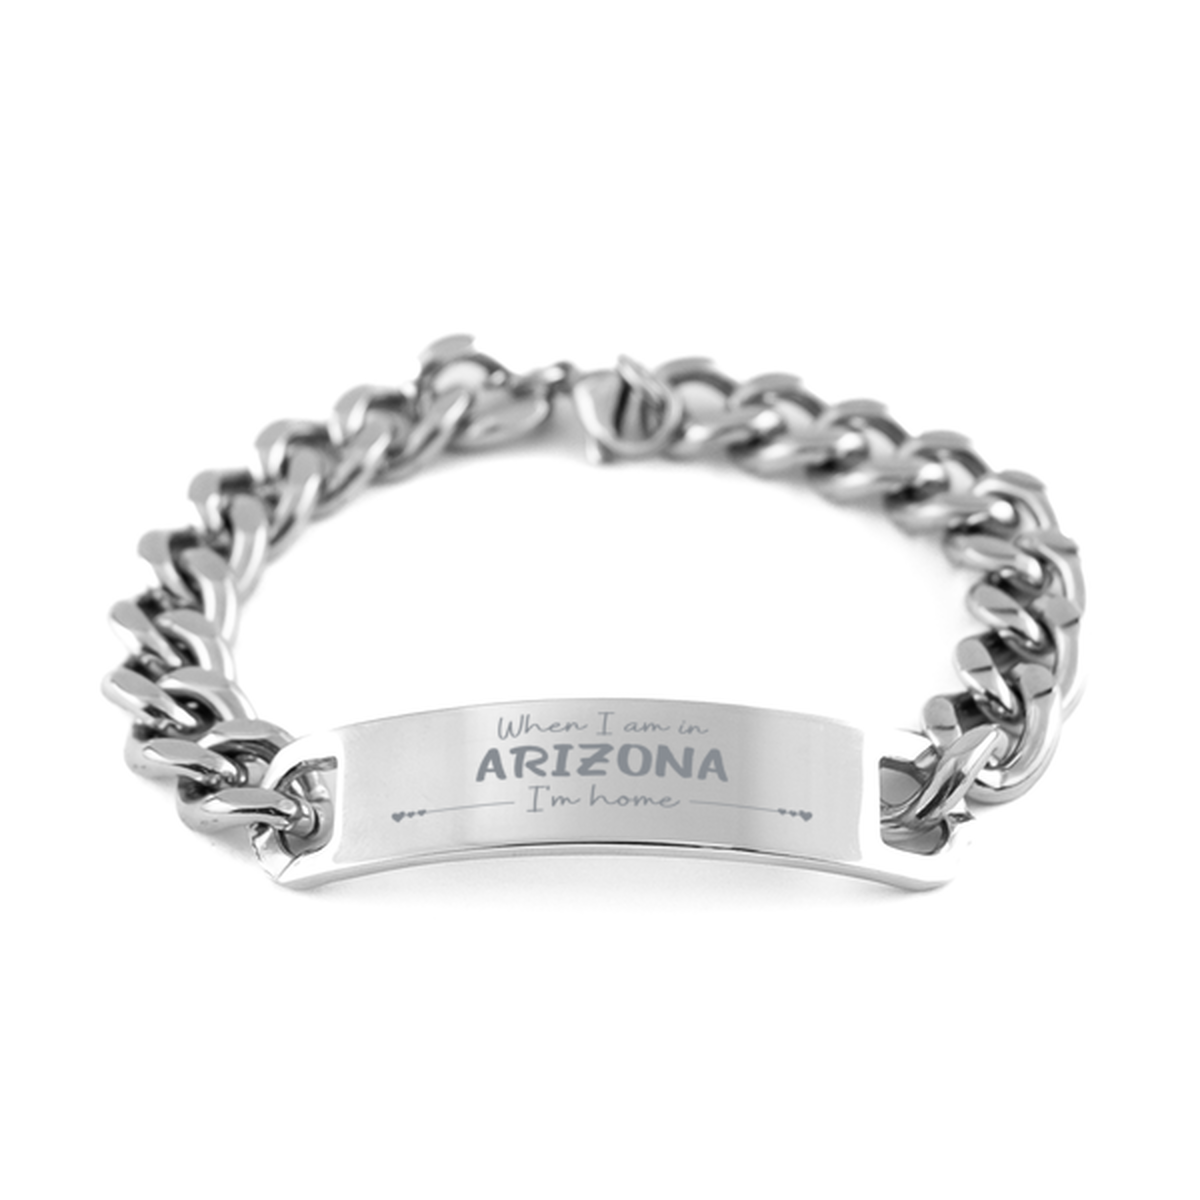 When I am in Arizona I'm home Cuban Chain Stainless Steel Bracelet, Cheap Gifts For Arizona, State Arizona Birthday Gifts for Friends Coworker